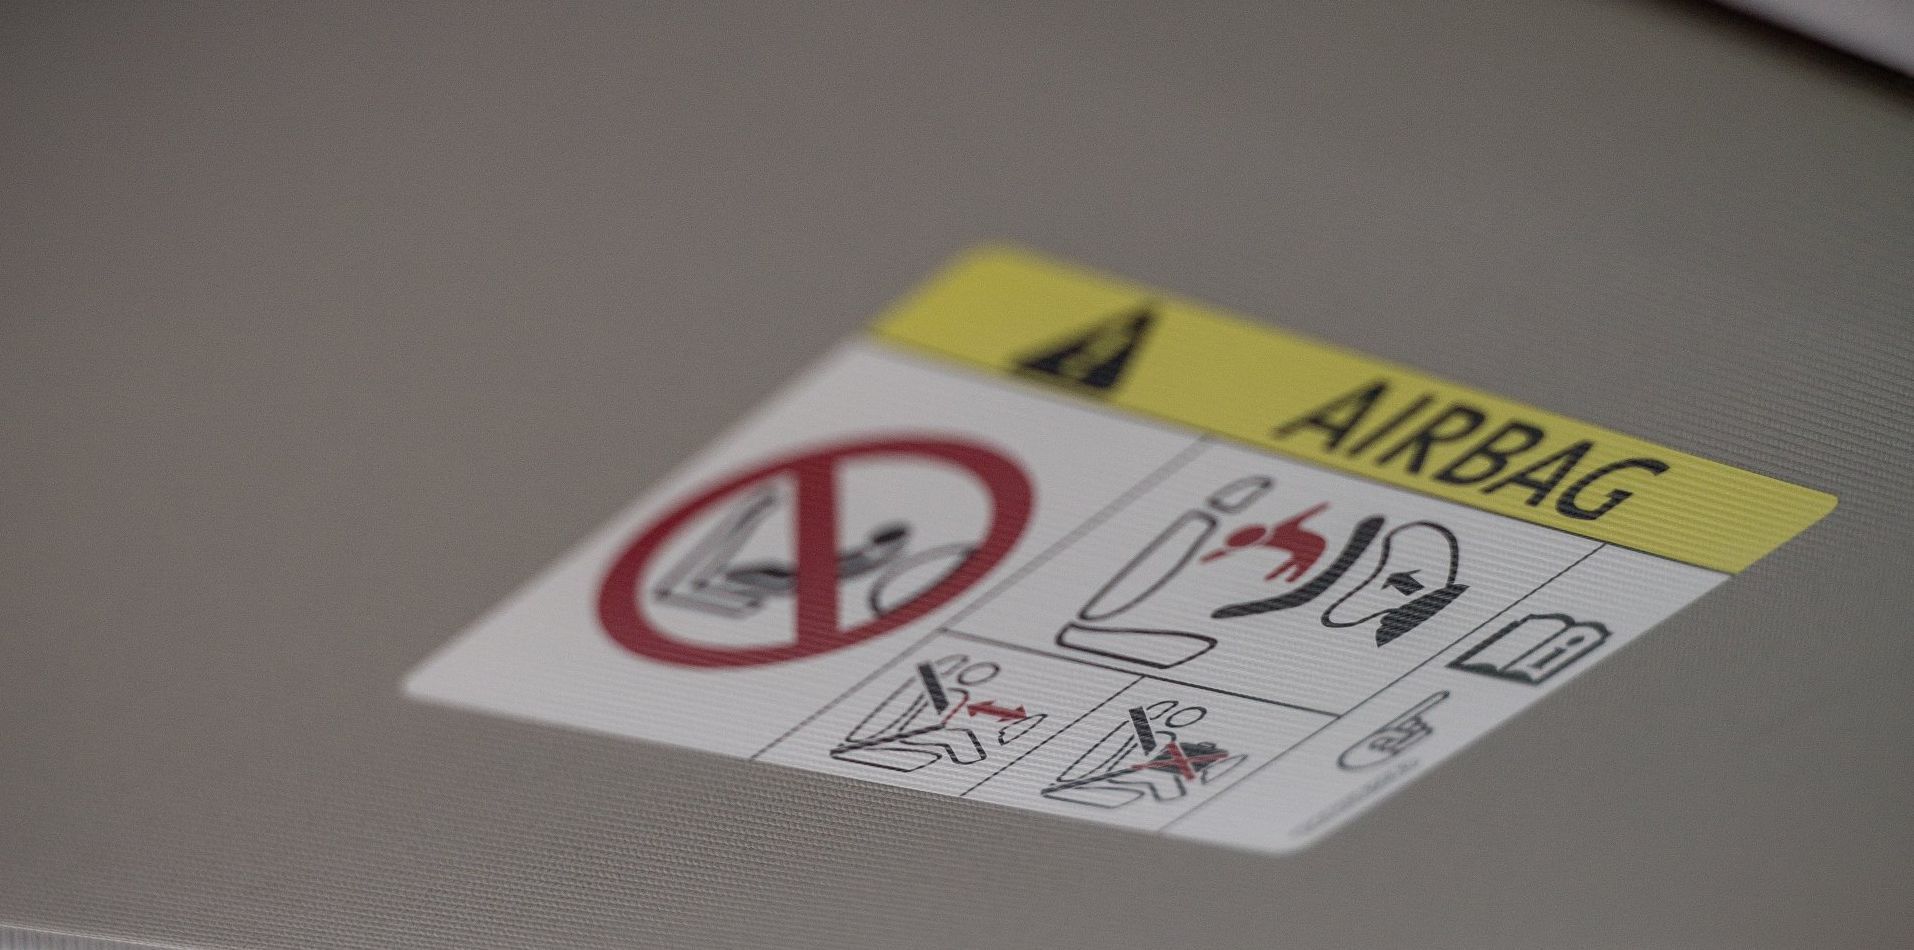 a close up of an airbag warning sticker on a car